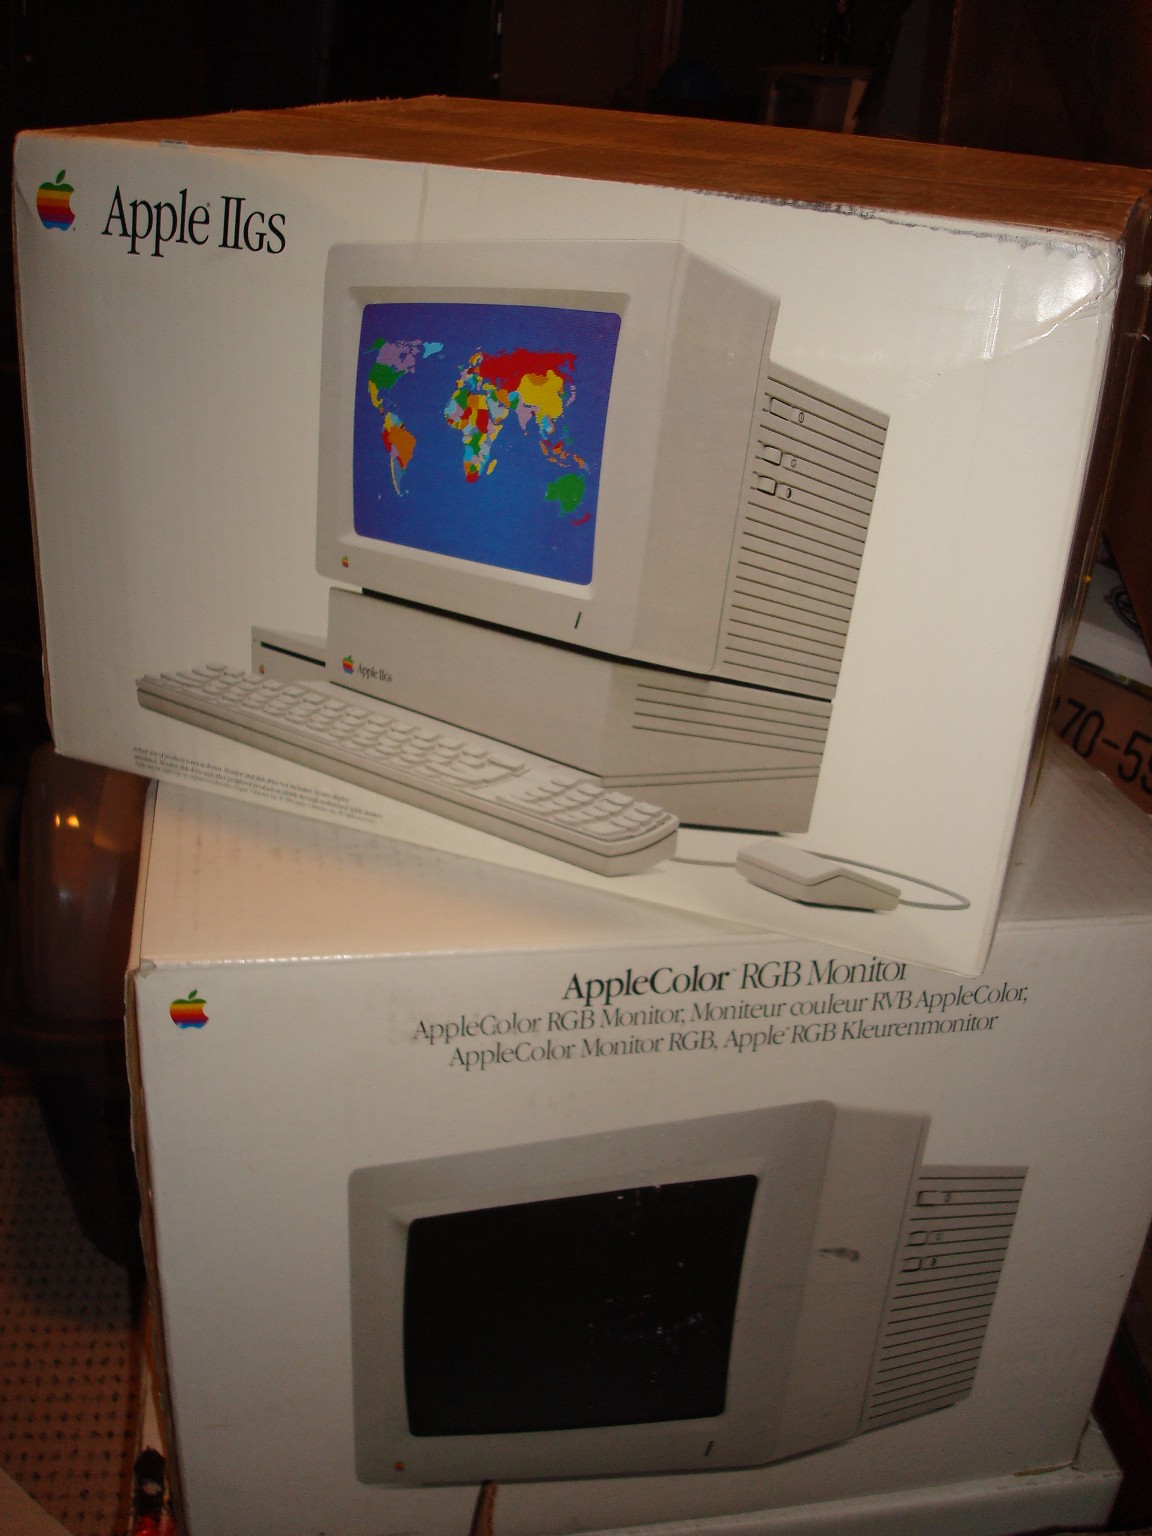 WOW!!! FOR SALE: Apple IIgs System Bundle - BRAND NEW IN BOX!!!! | Applefritter1152 x 1536